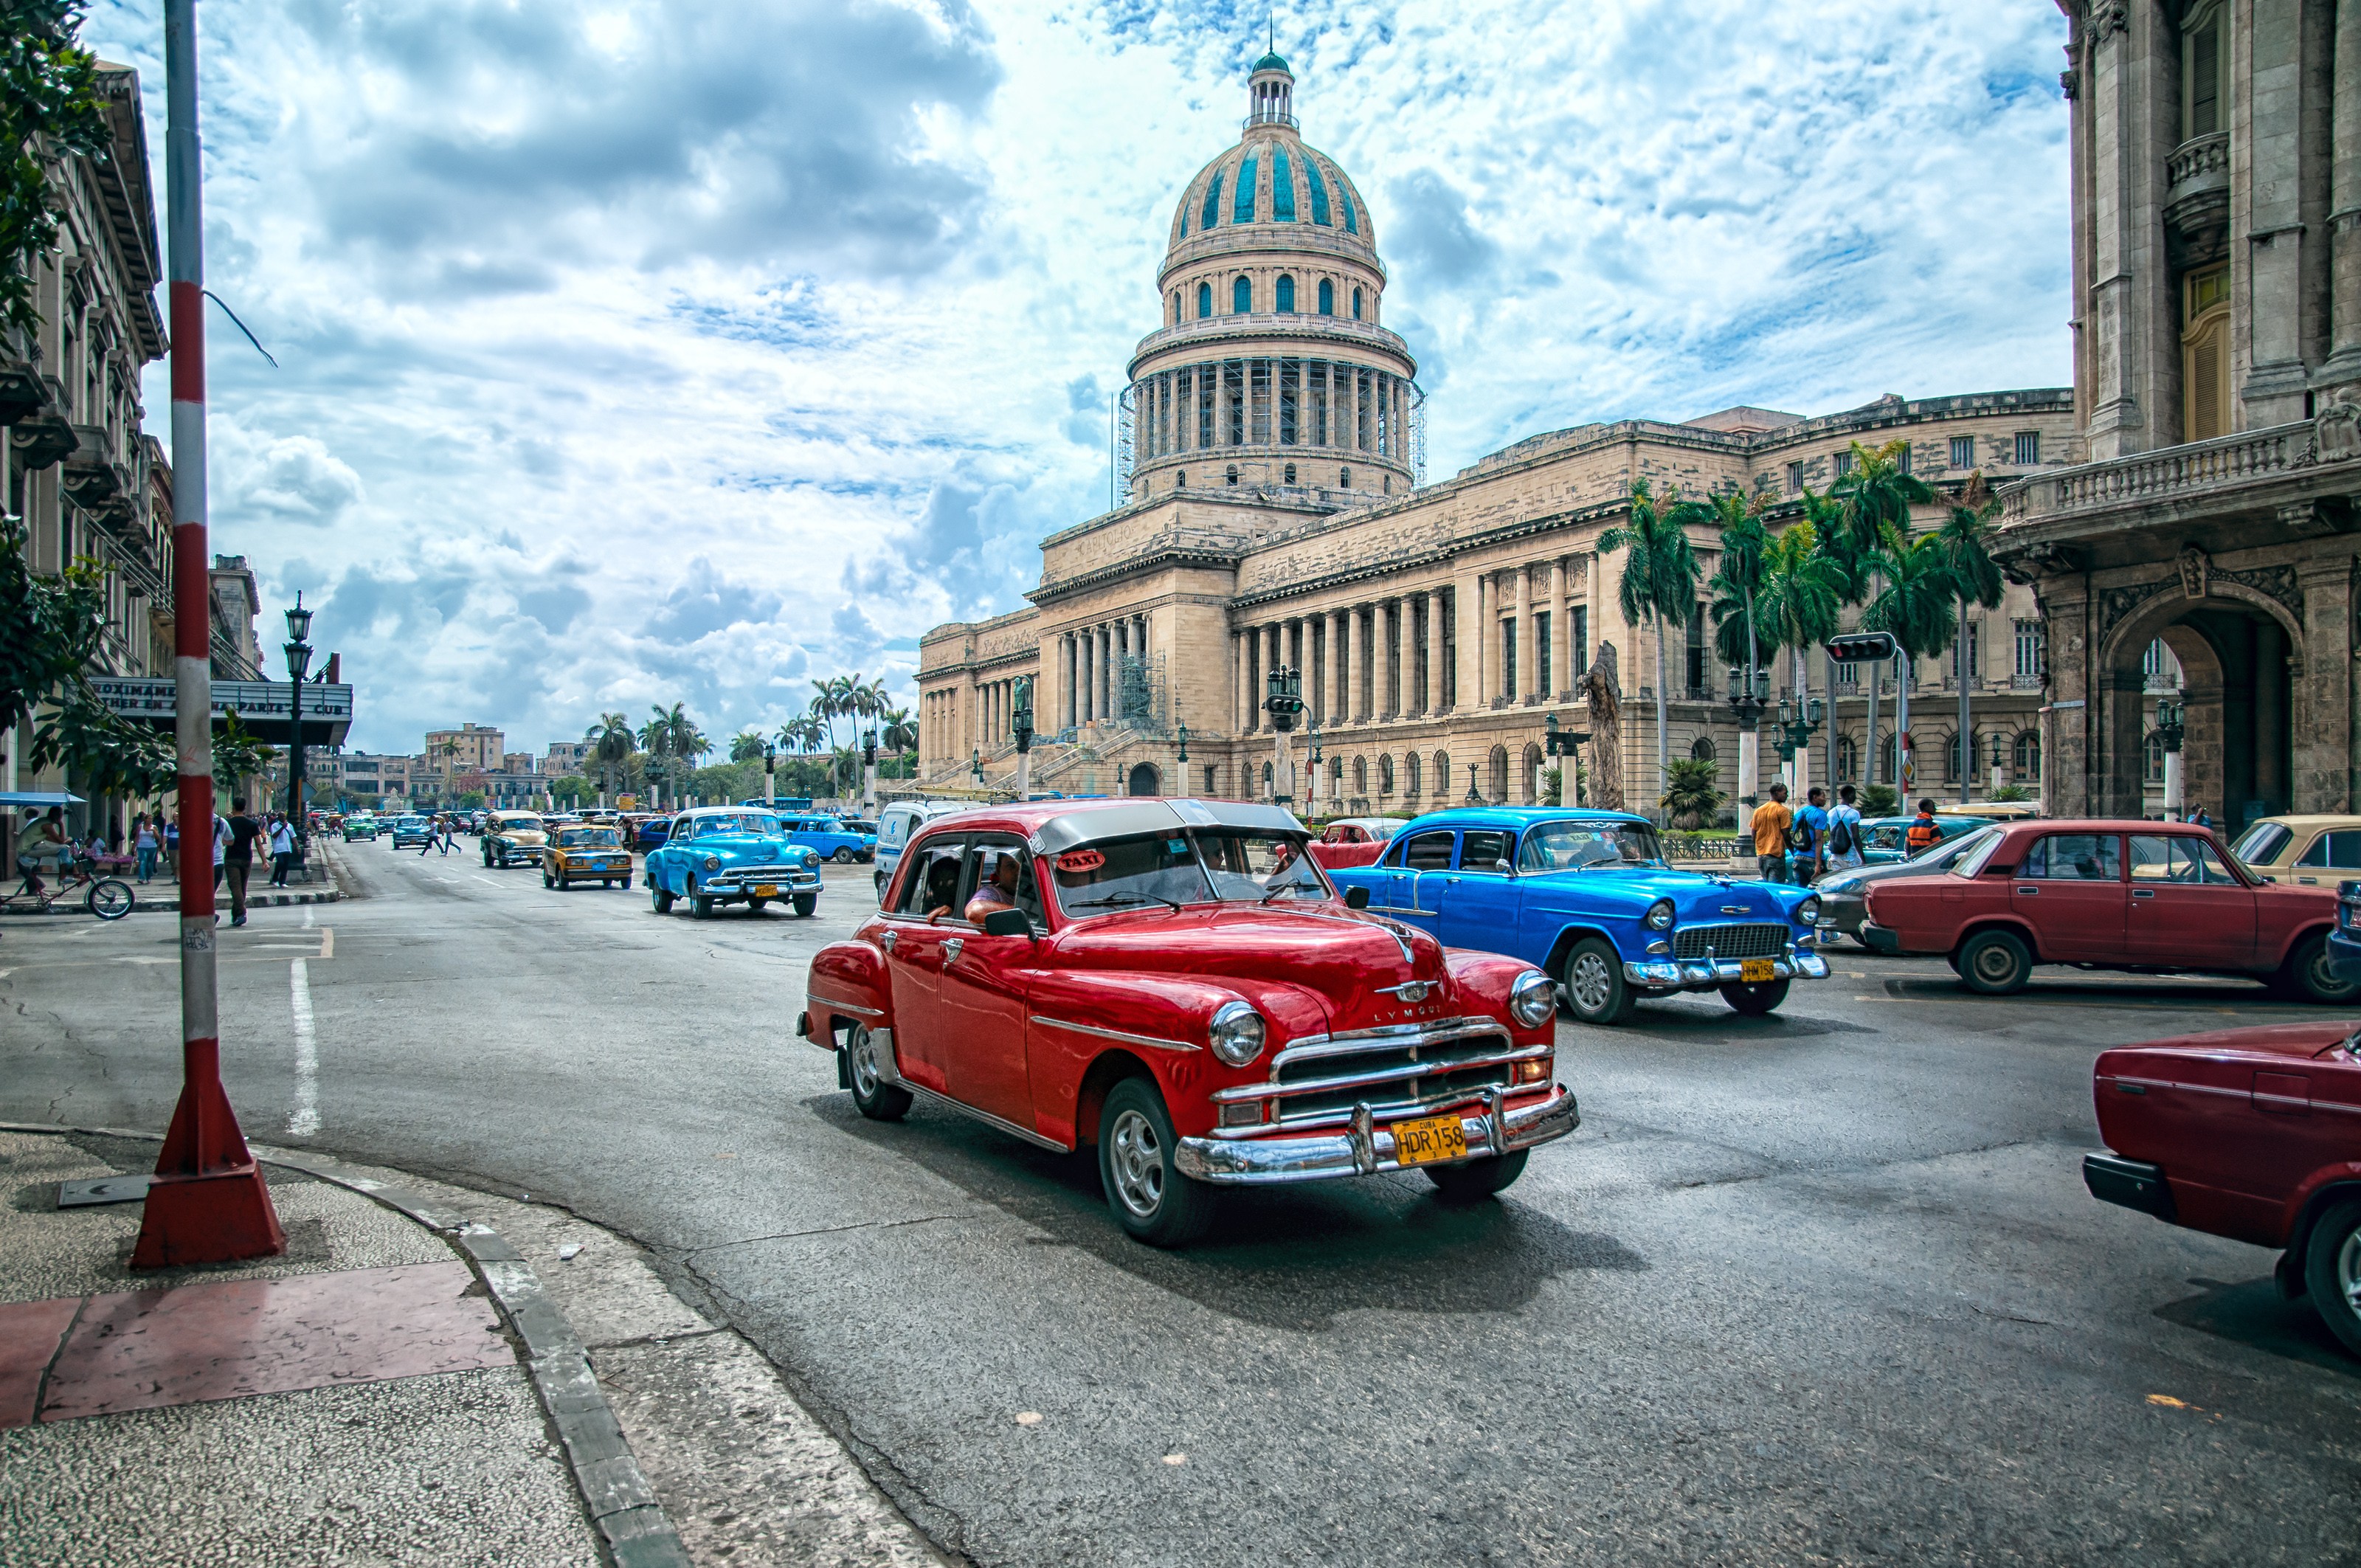 android cuba, havana, dome, man made, building, car, hdr, cities